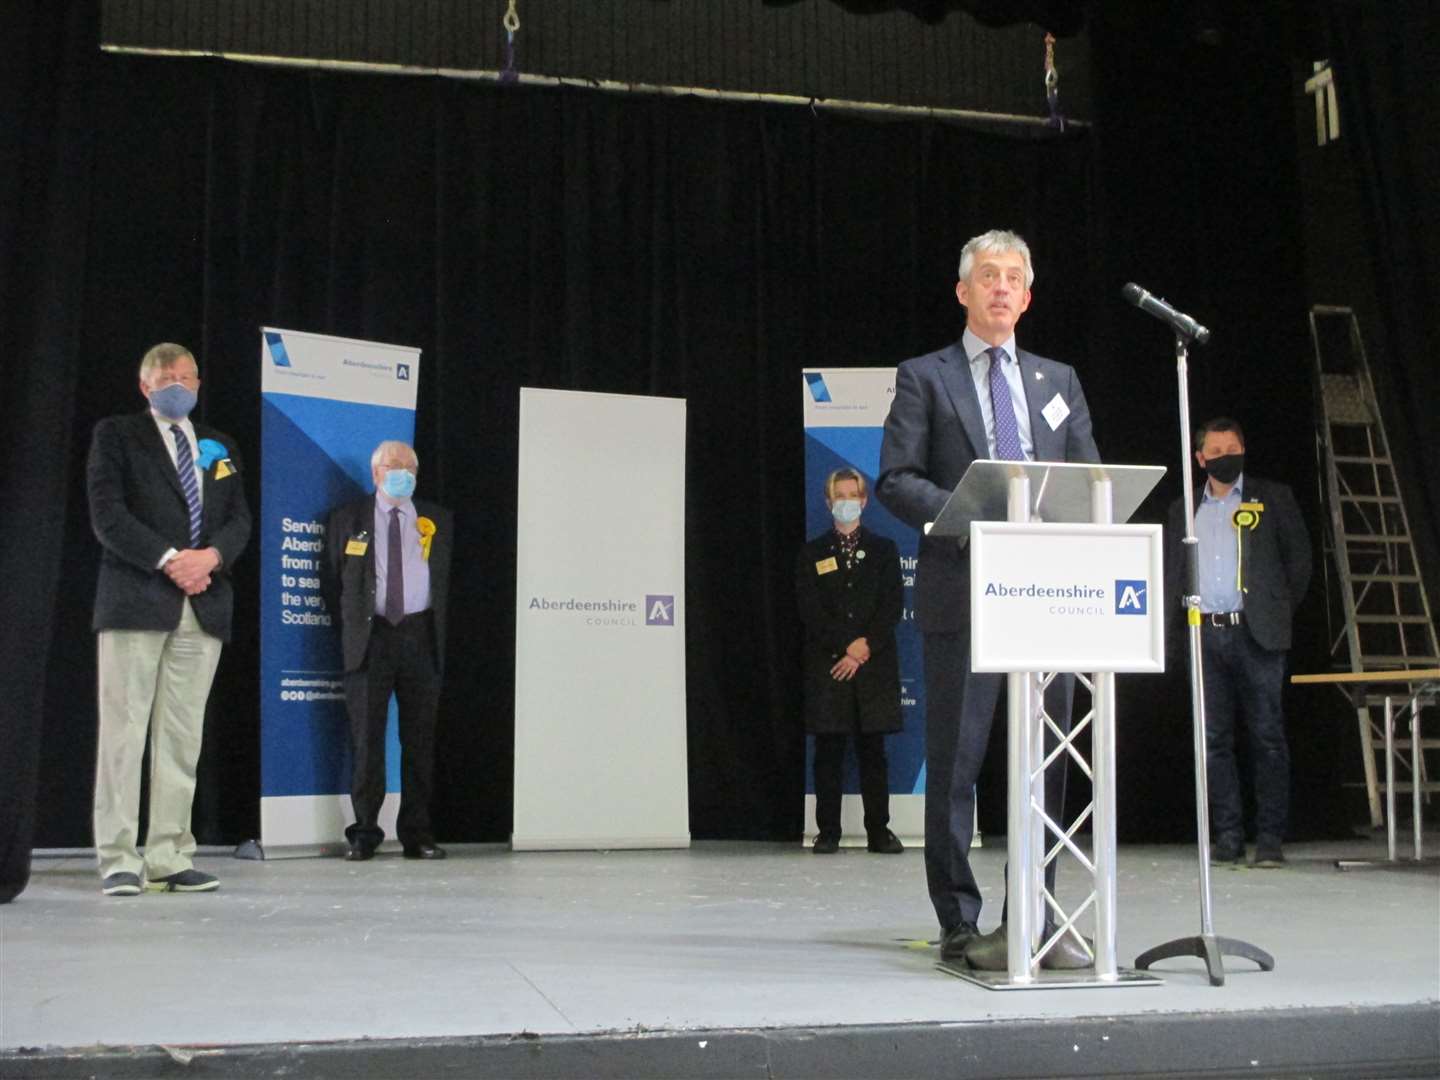 Returning officer and Aberdeenshire Council chief executive Jim Savege announces the result at Inverurie Town Hall.